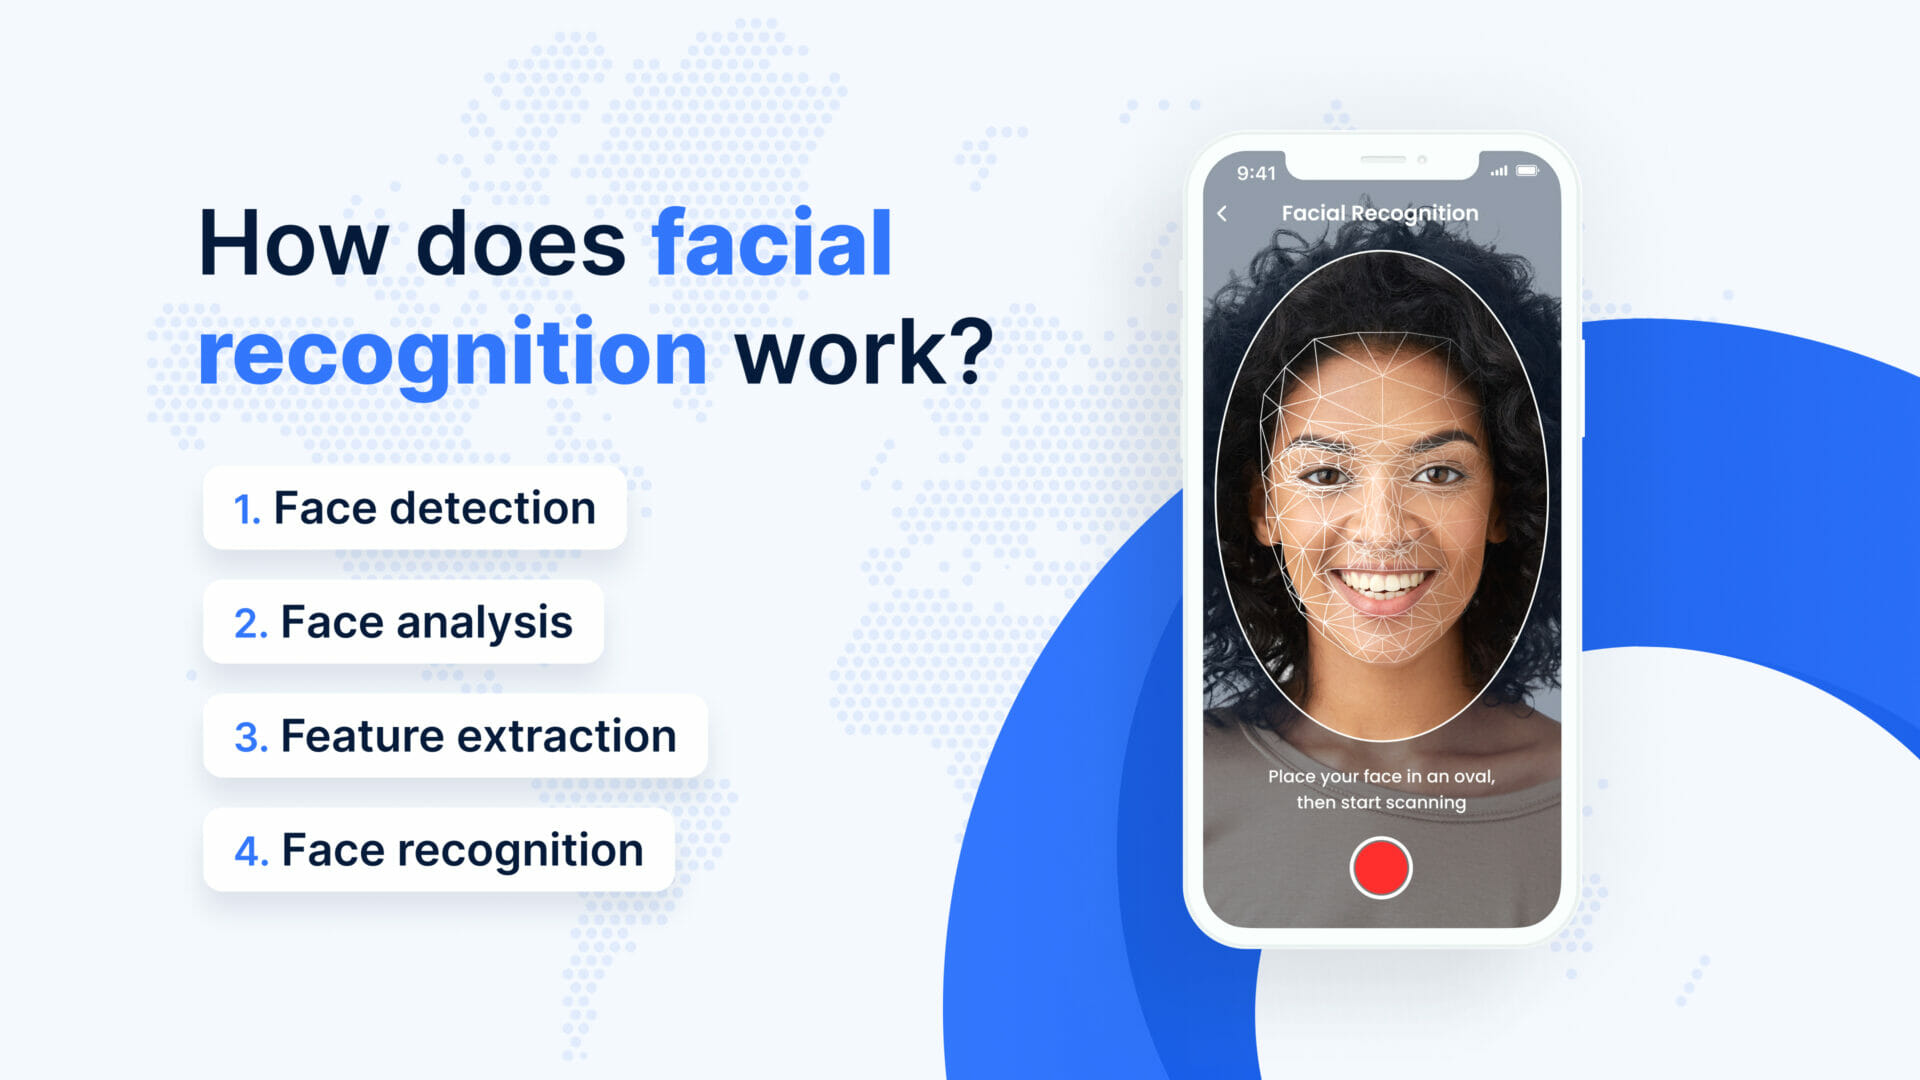 Facial recognition solutions